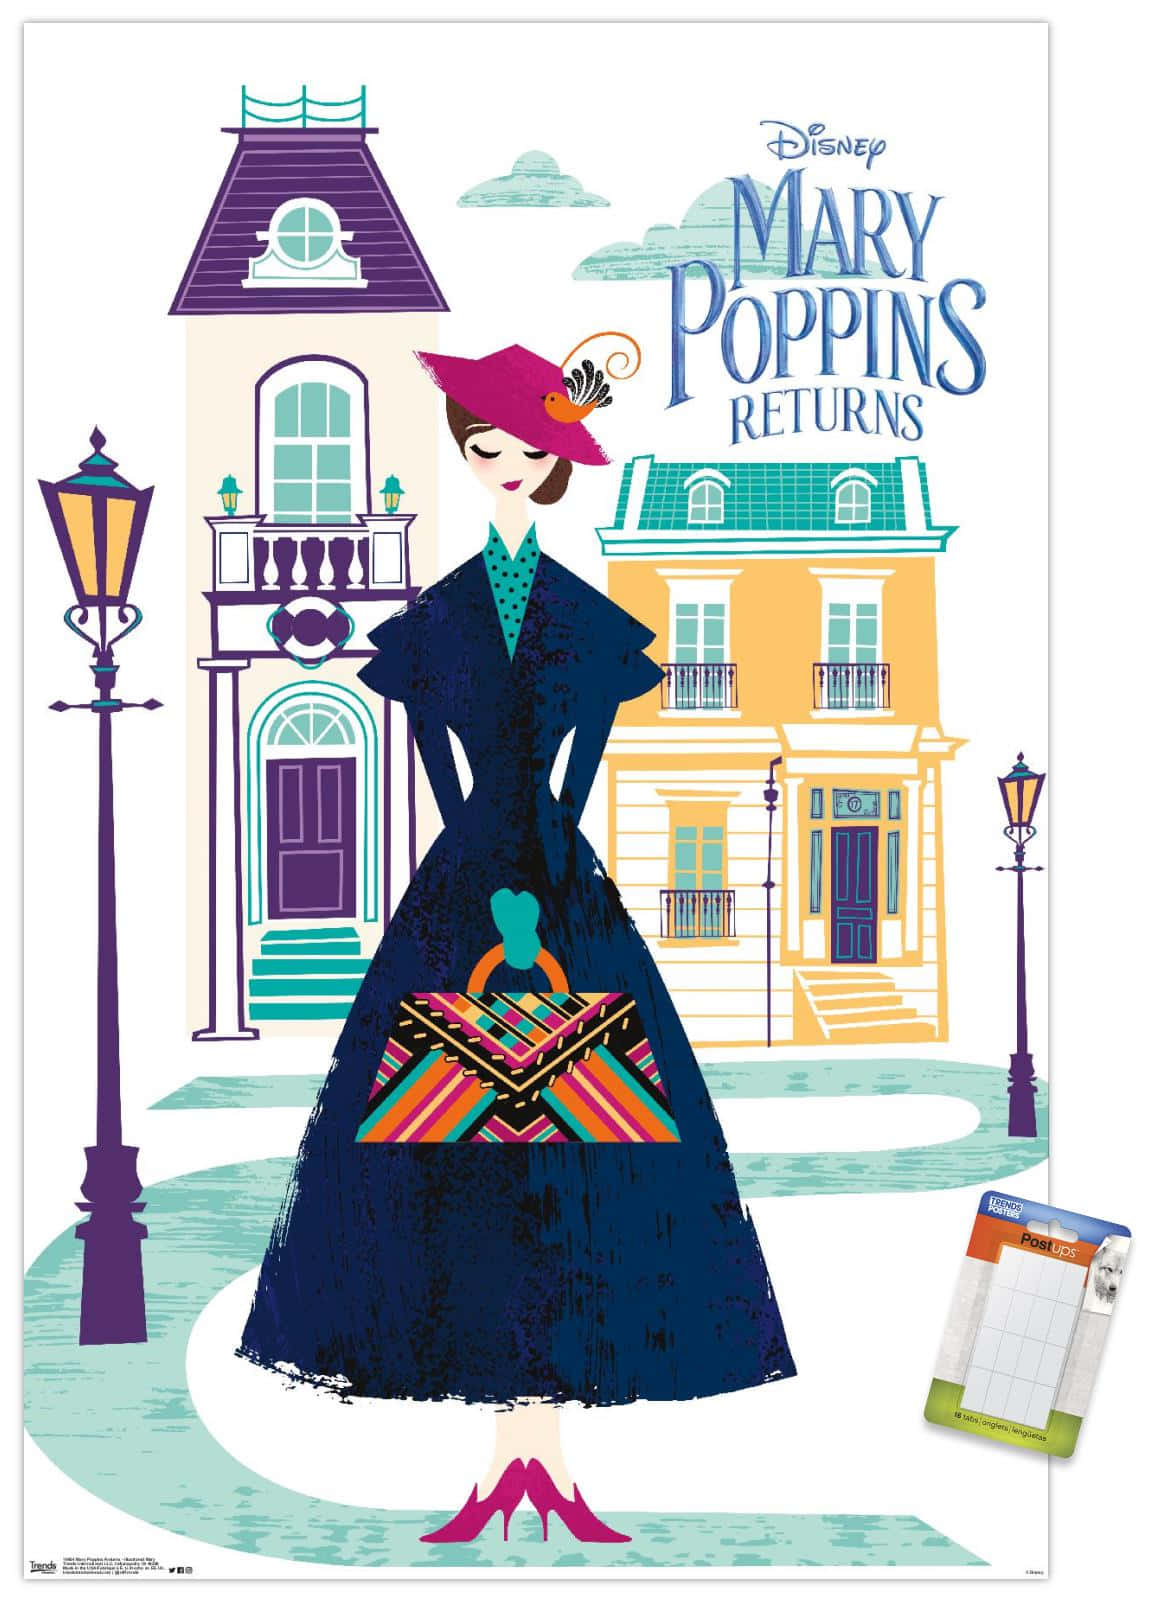 Magical Mary Poppins ascending with her umbrella and bag Wallpaper